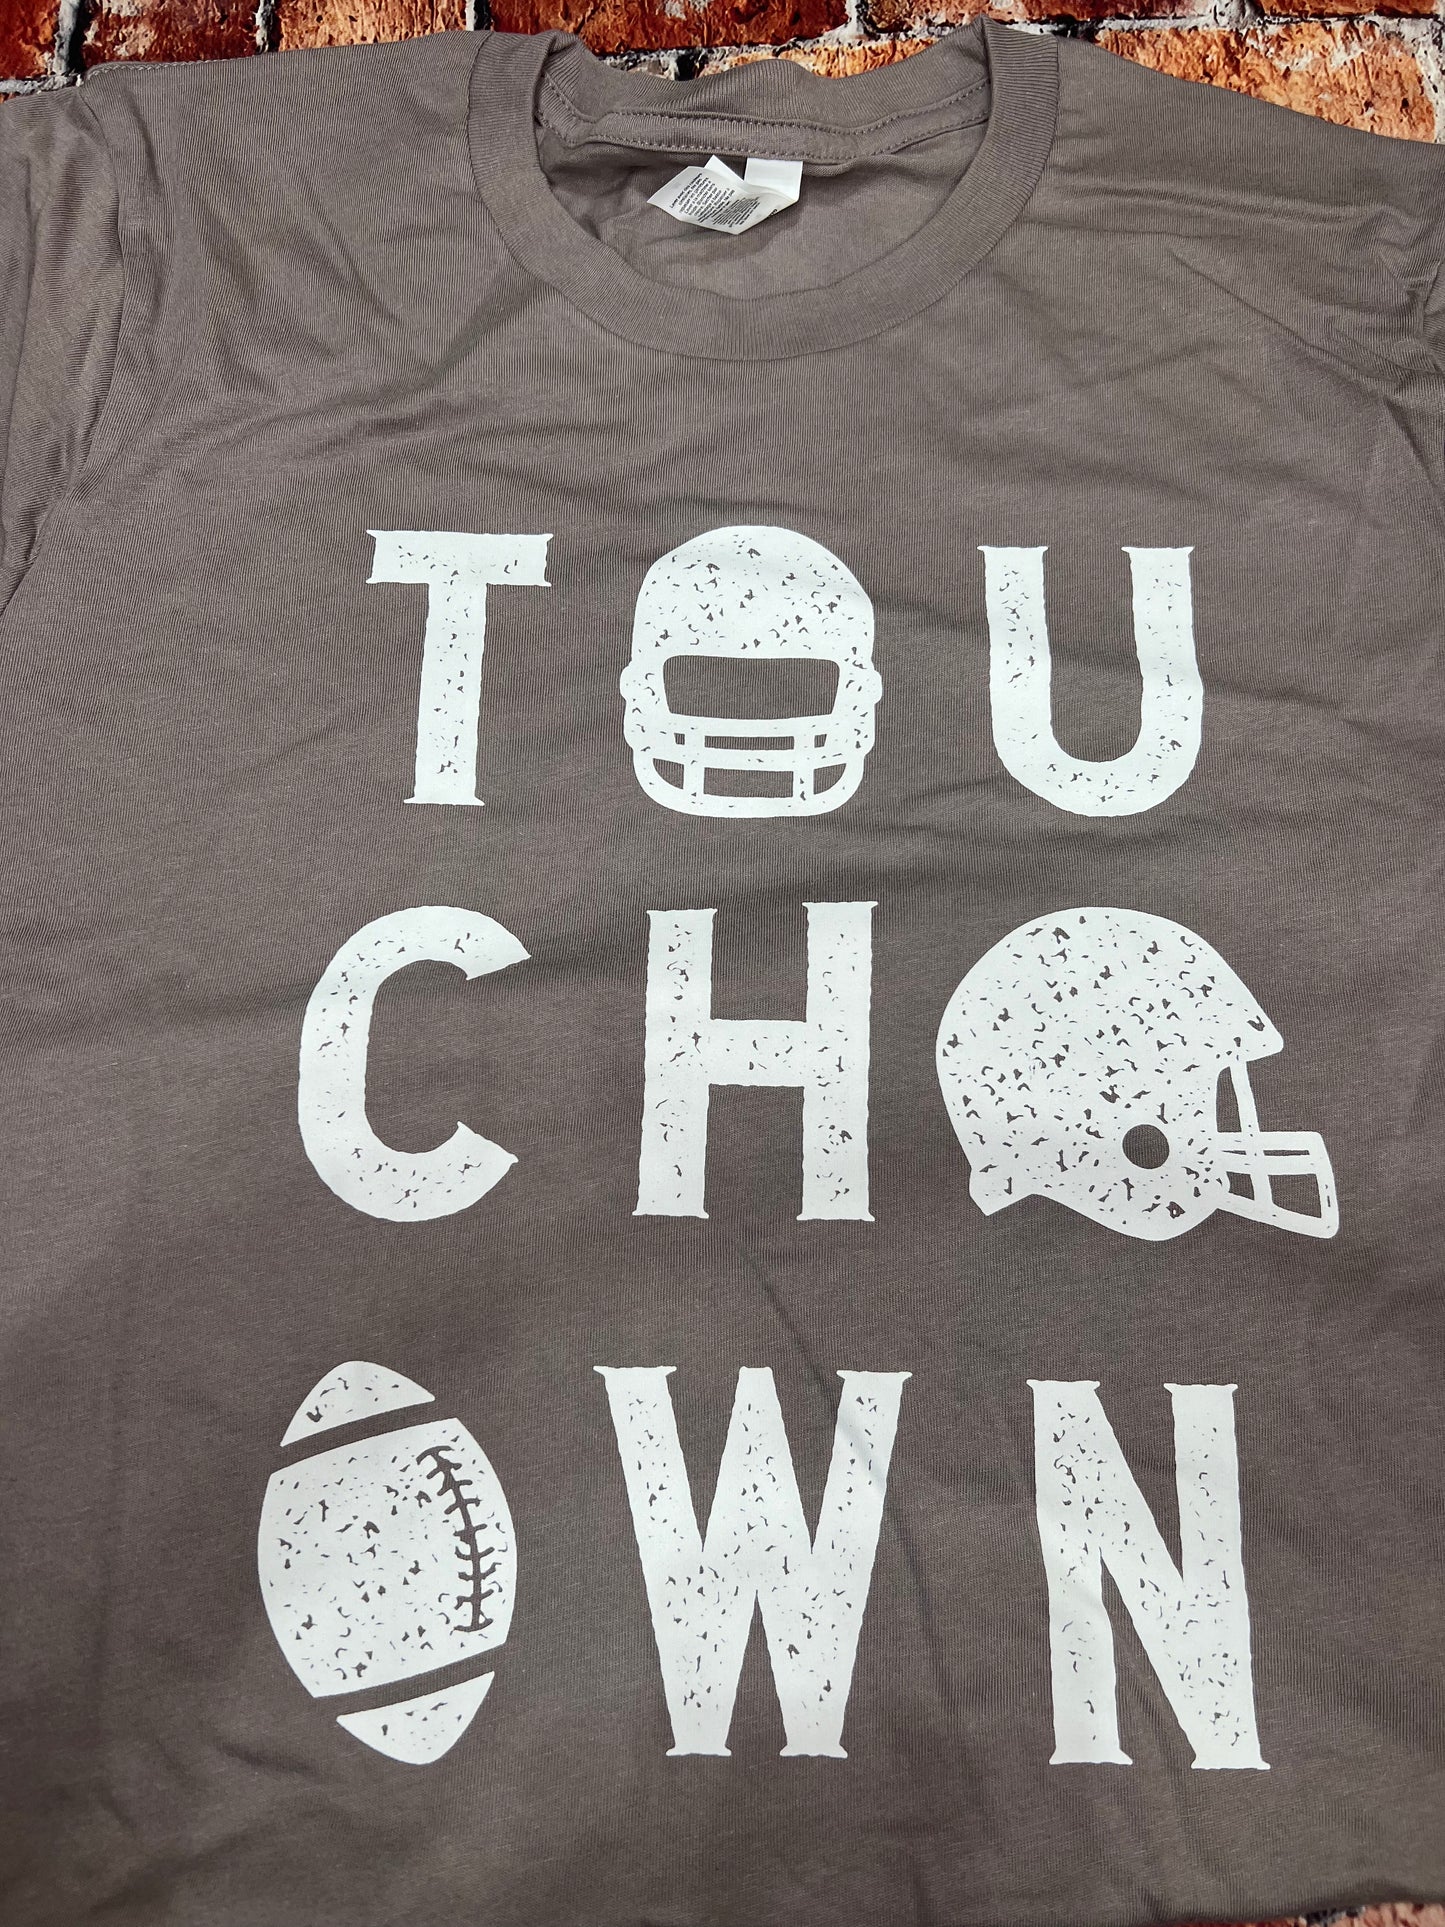 MED - TOUCHDOWN t-shirt with ripped sleeve on the back side (please see image)